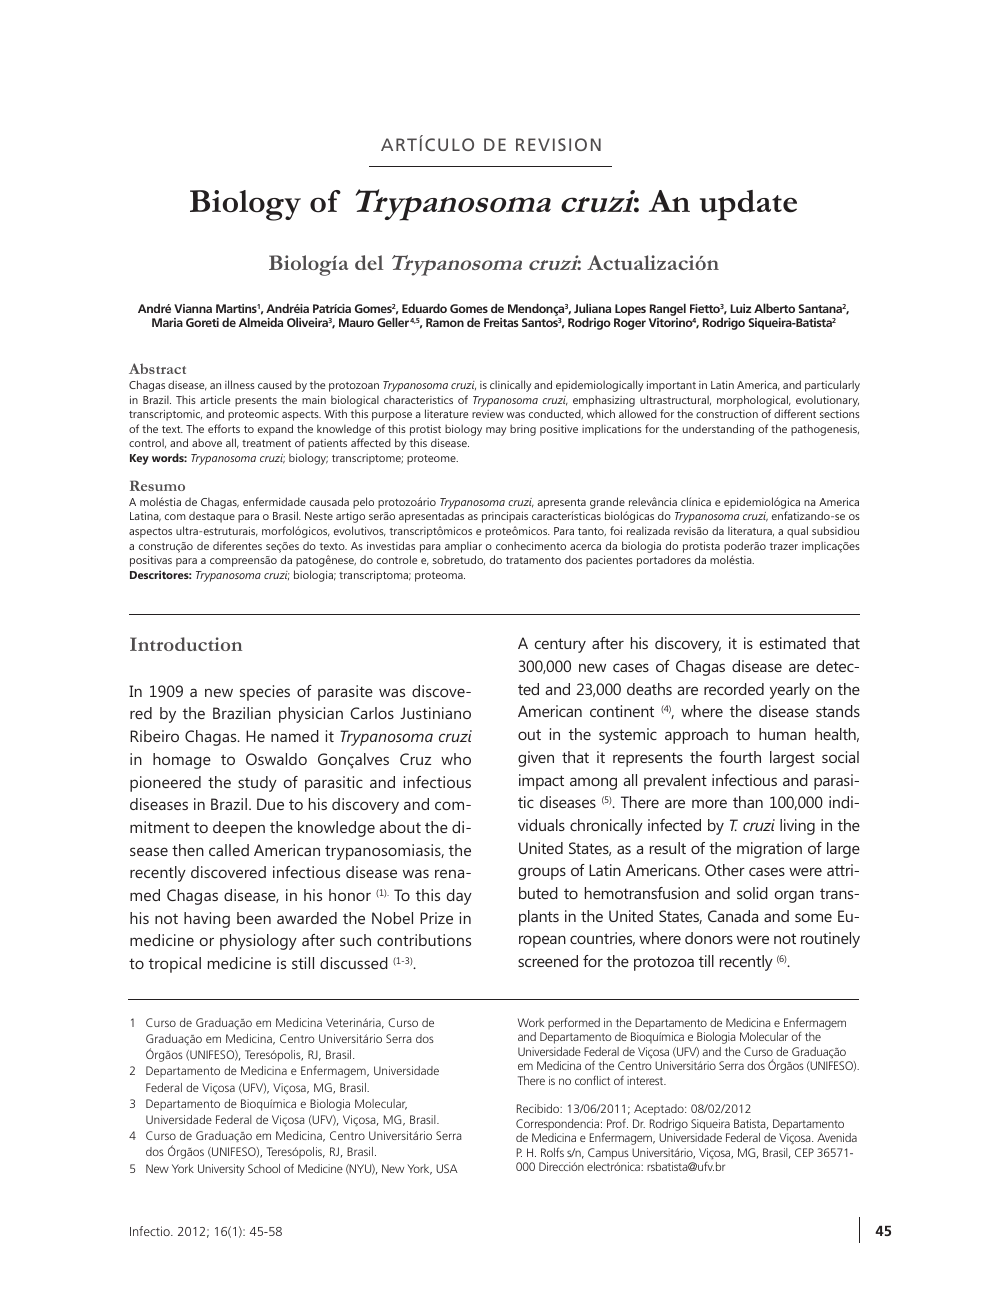 Biology Of Trypanosoma Cruzi An Update Topic Of Research Paper In Biological Sciences Download Scholarly Article Pdf And Read For Free On Cyberleninka Open Science Hub